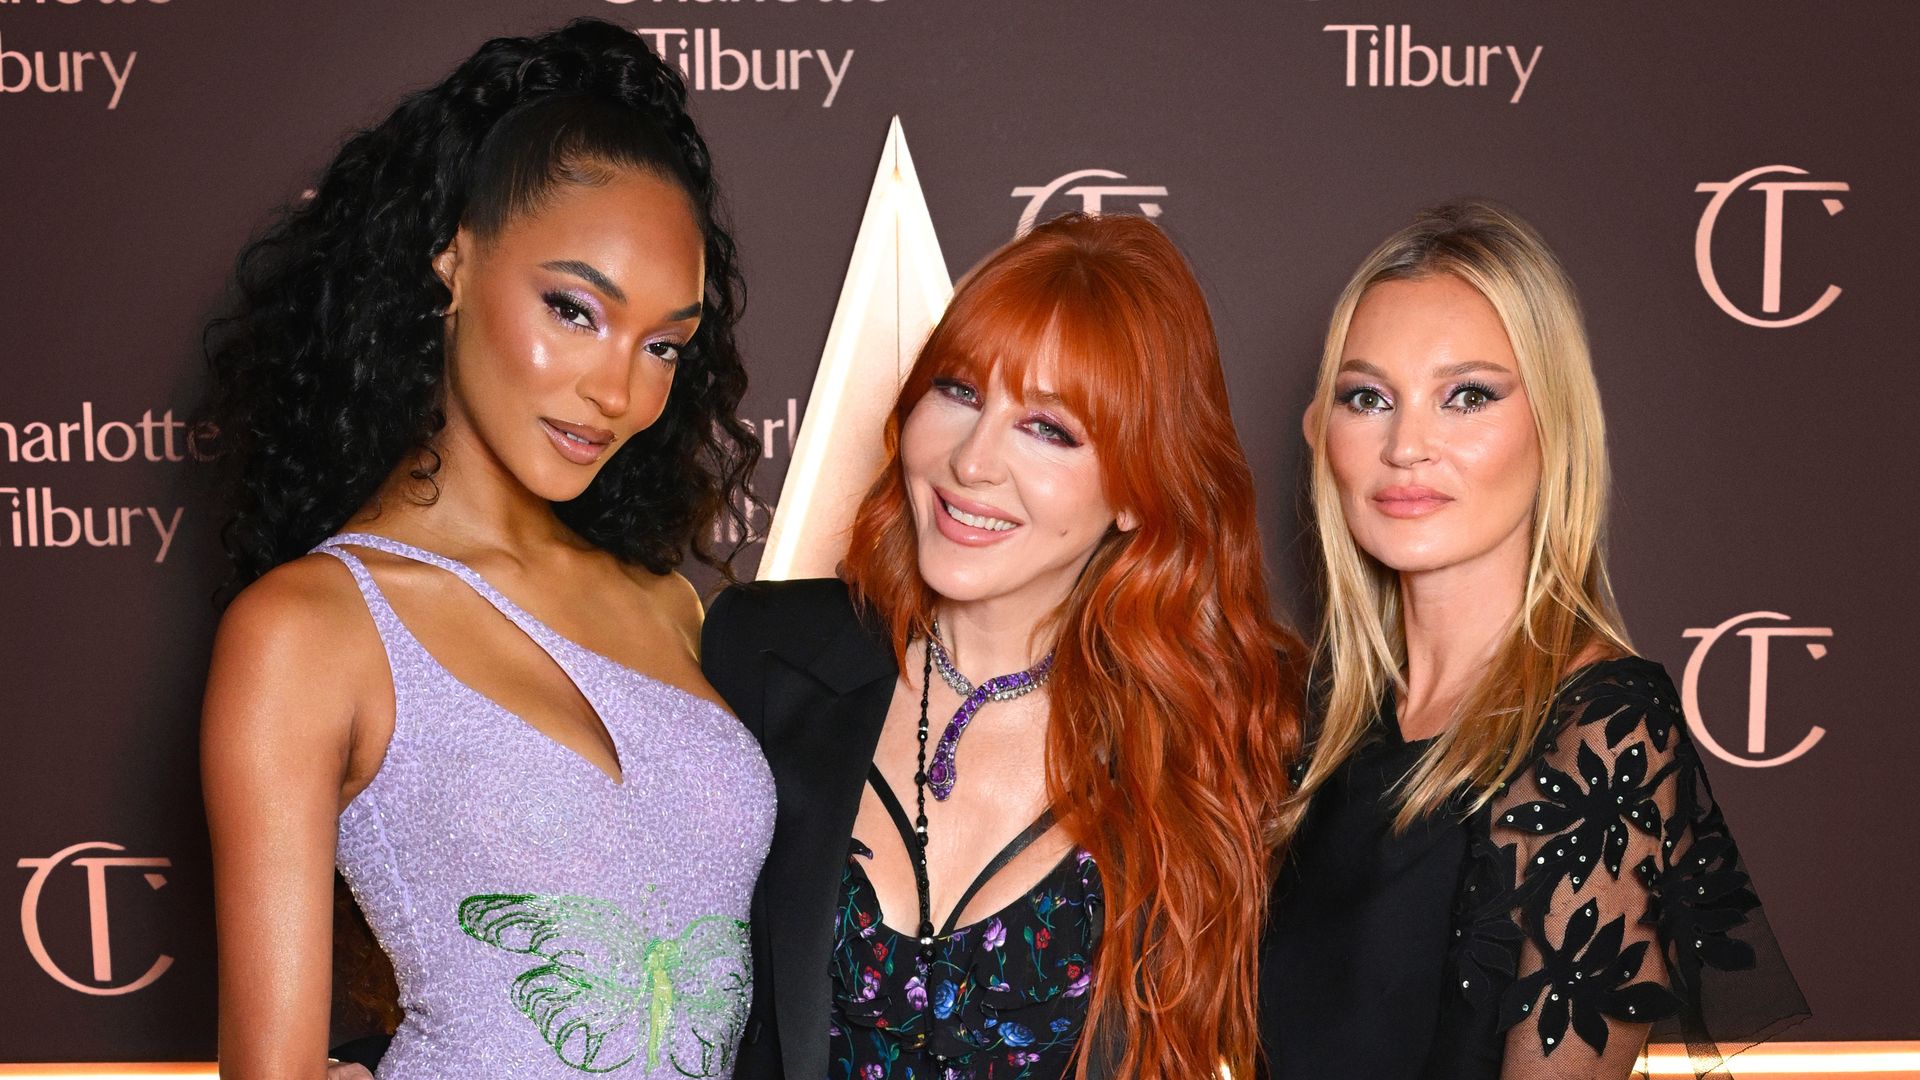 Kate Moss and Jourdan Dunn lead the glamour at Charlotte Tilbury's lavish holiday campaign party